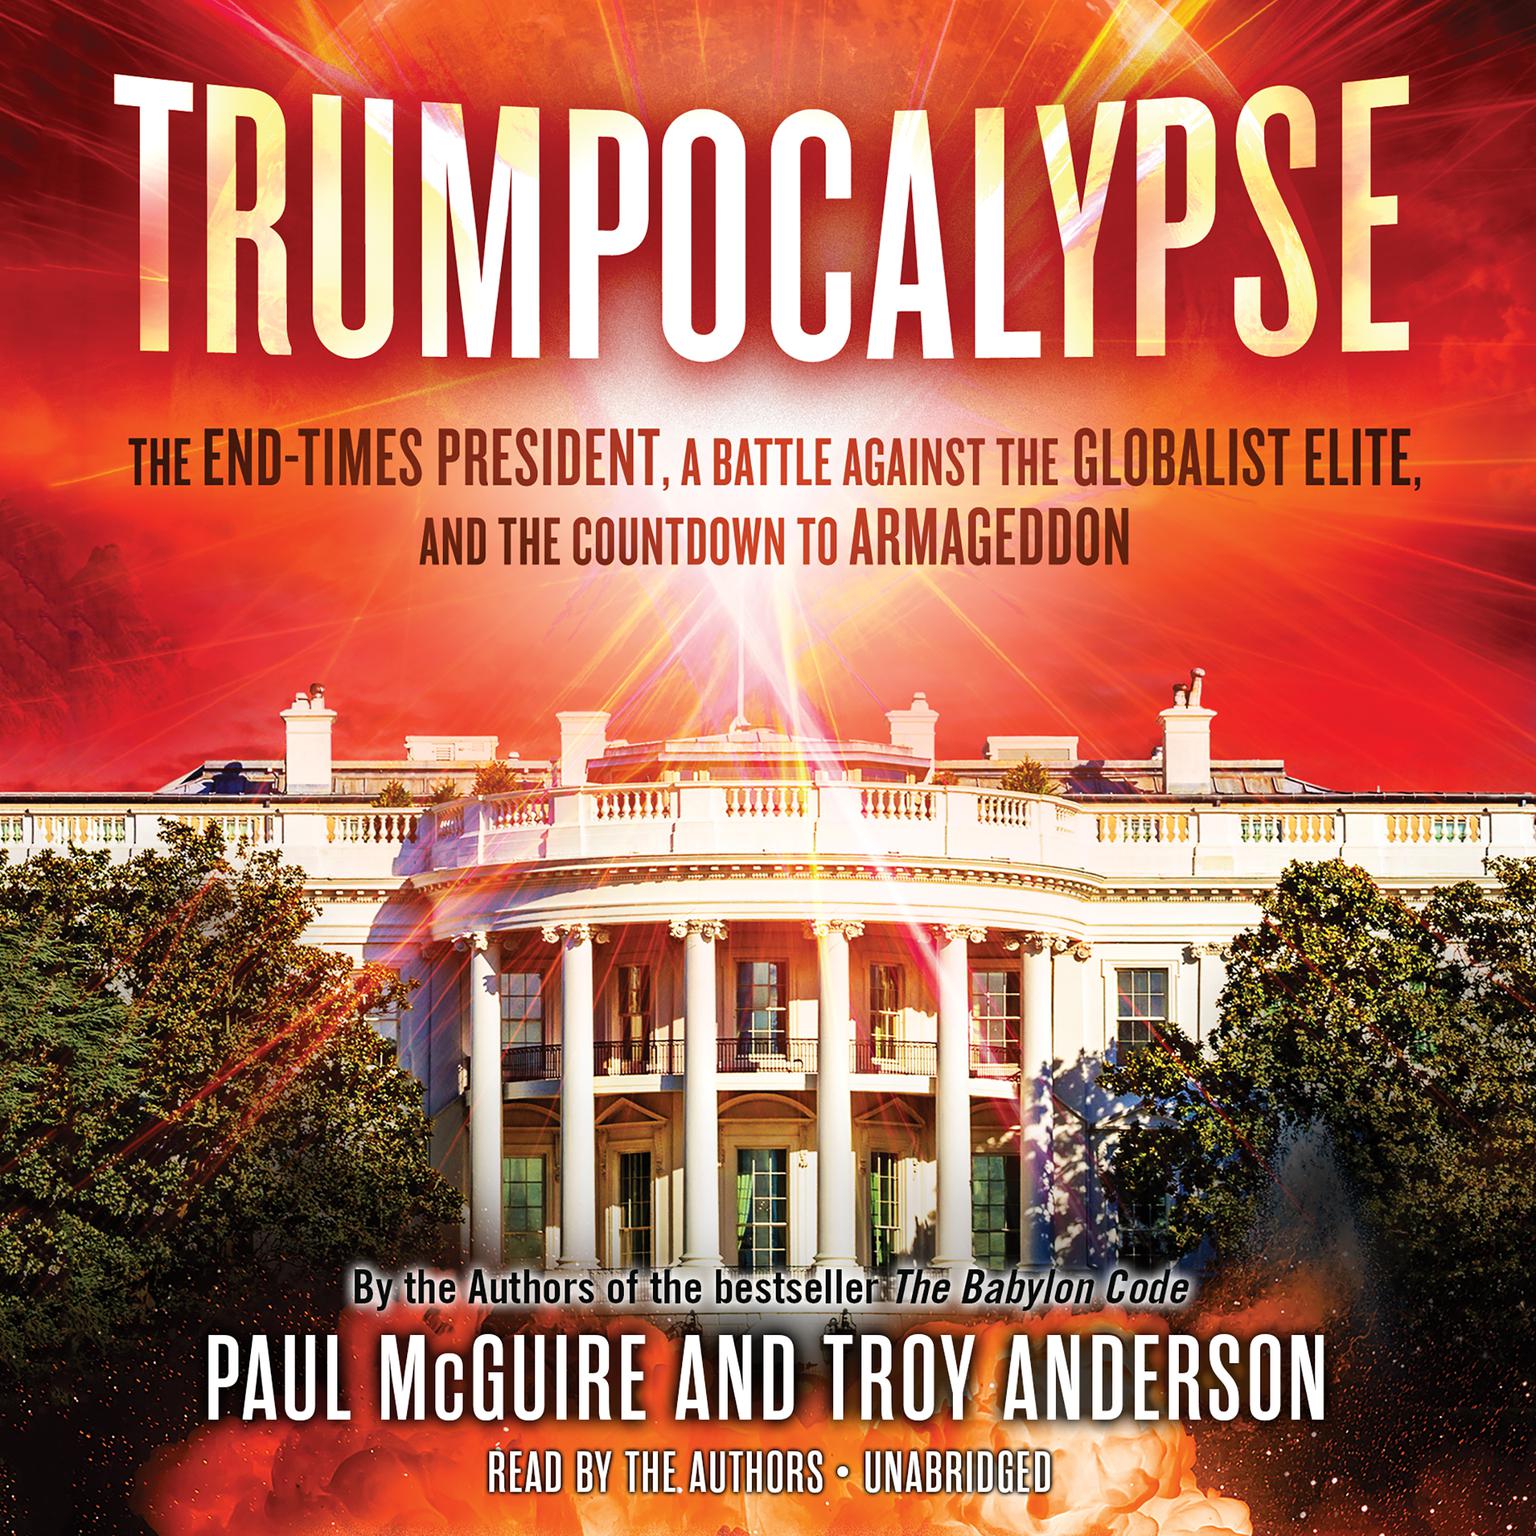 Trumpocalypse: The End-Times President, a Battle Against the Globalist Elite, and the Countdown to Armageddon Audiobook, by Paul McGuire